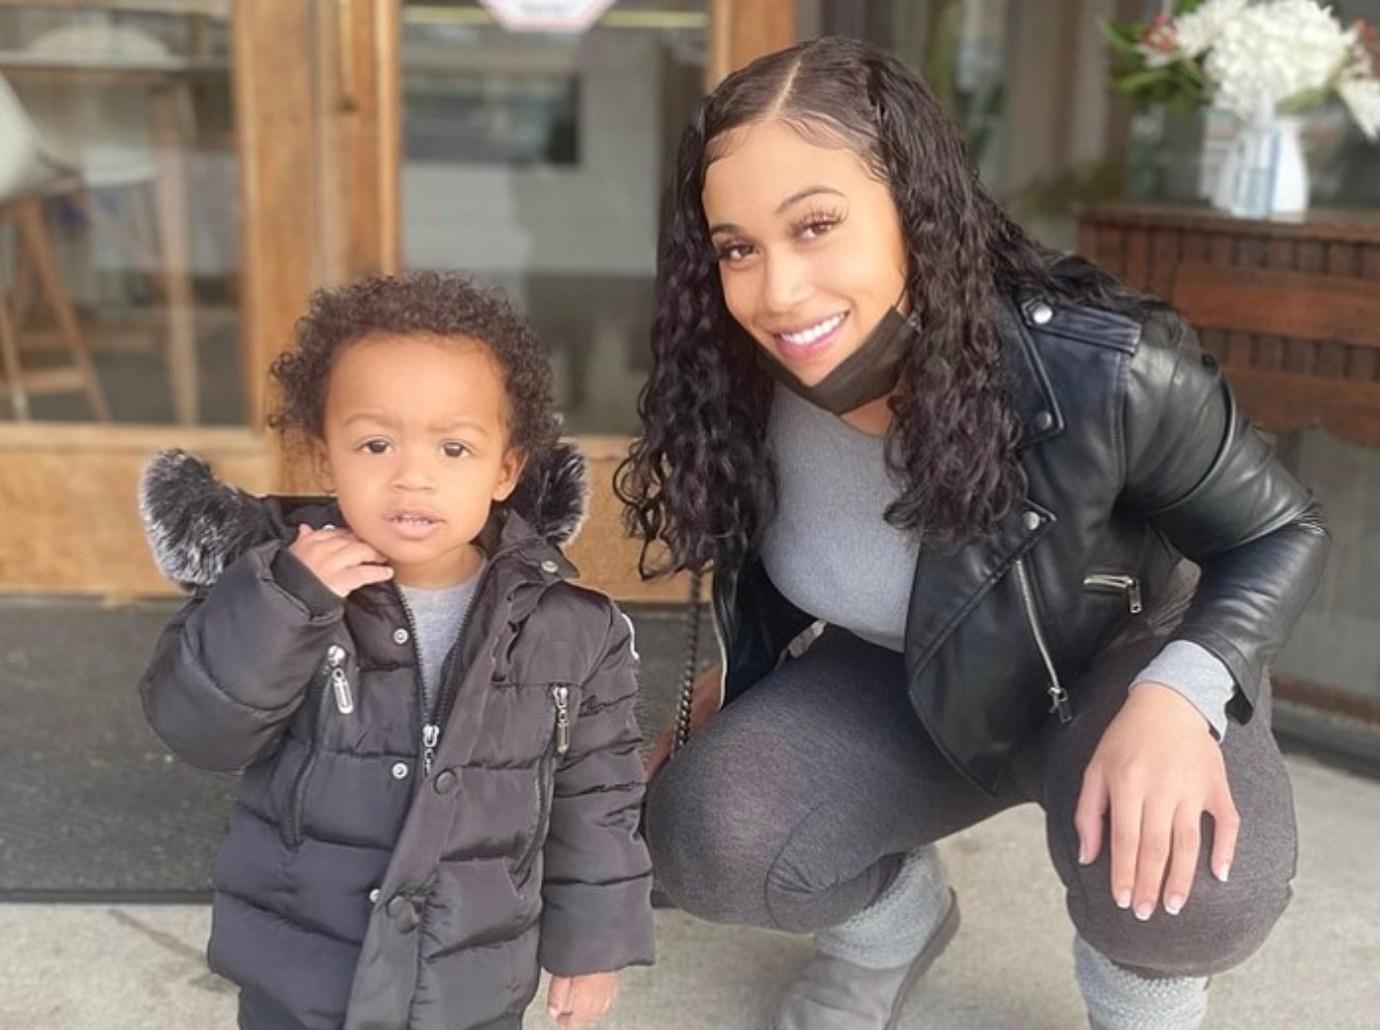 Joie Chavis Says She Doesn't Get Child Support From Bow Wow Or Future